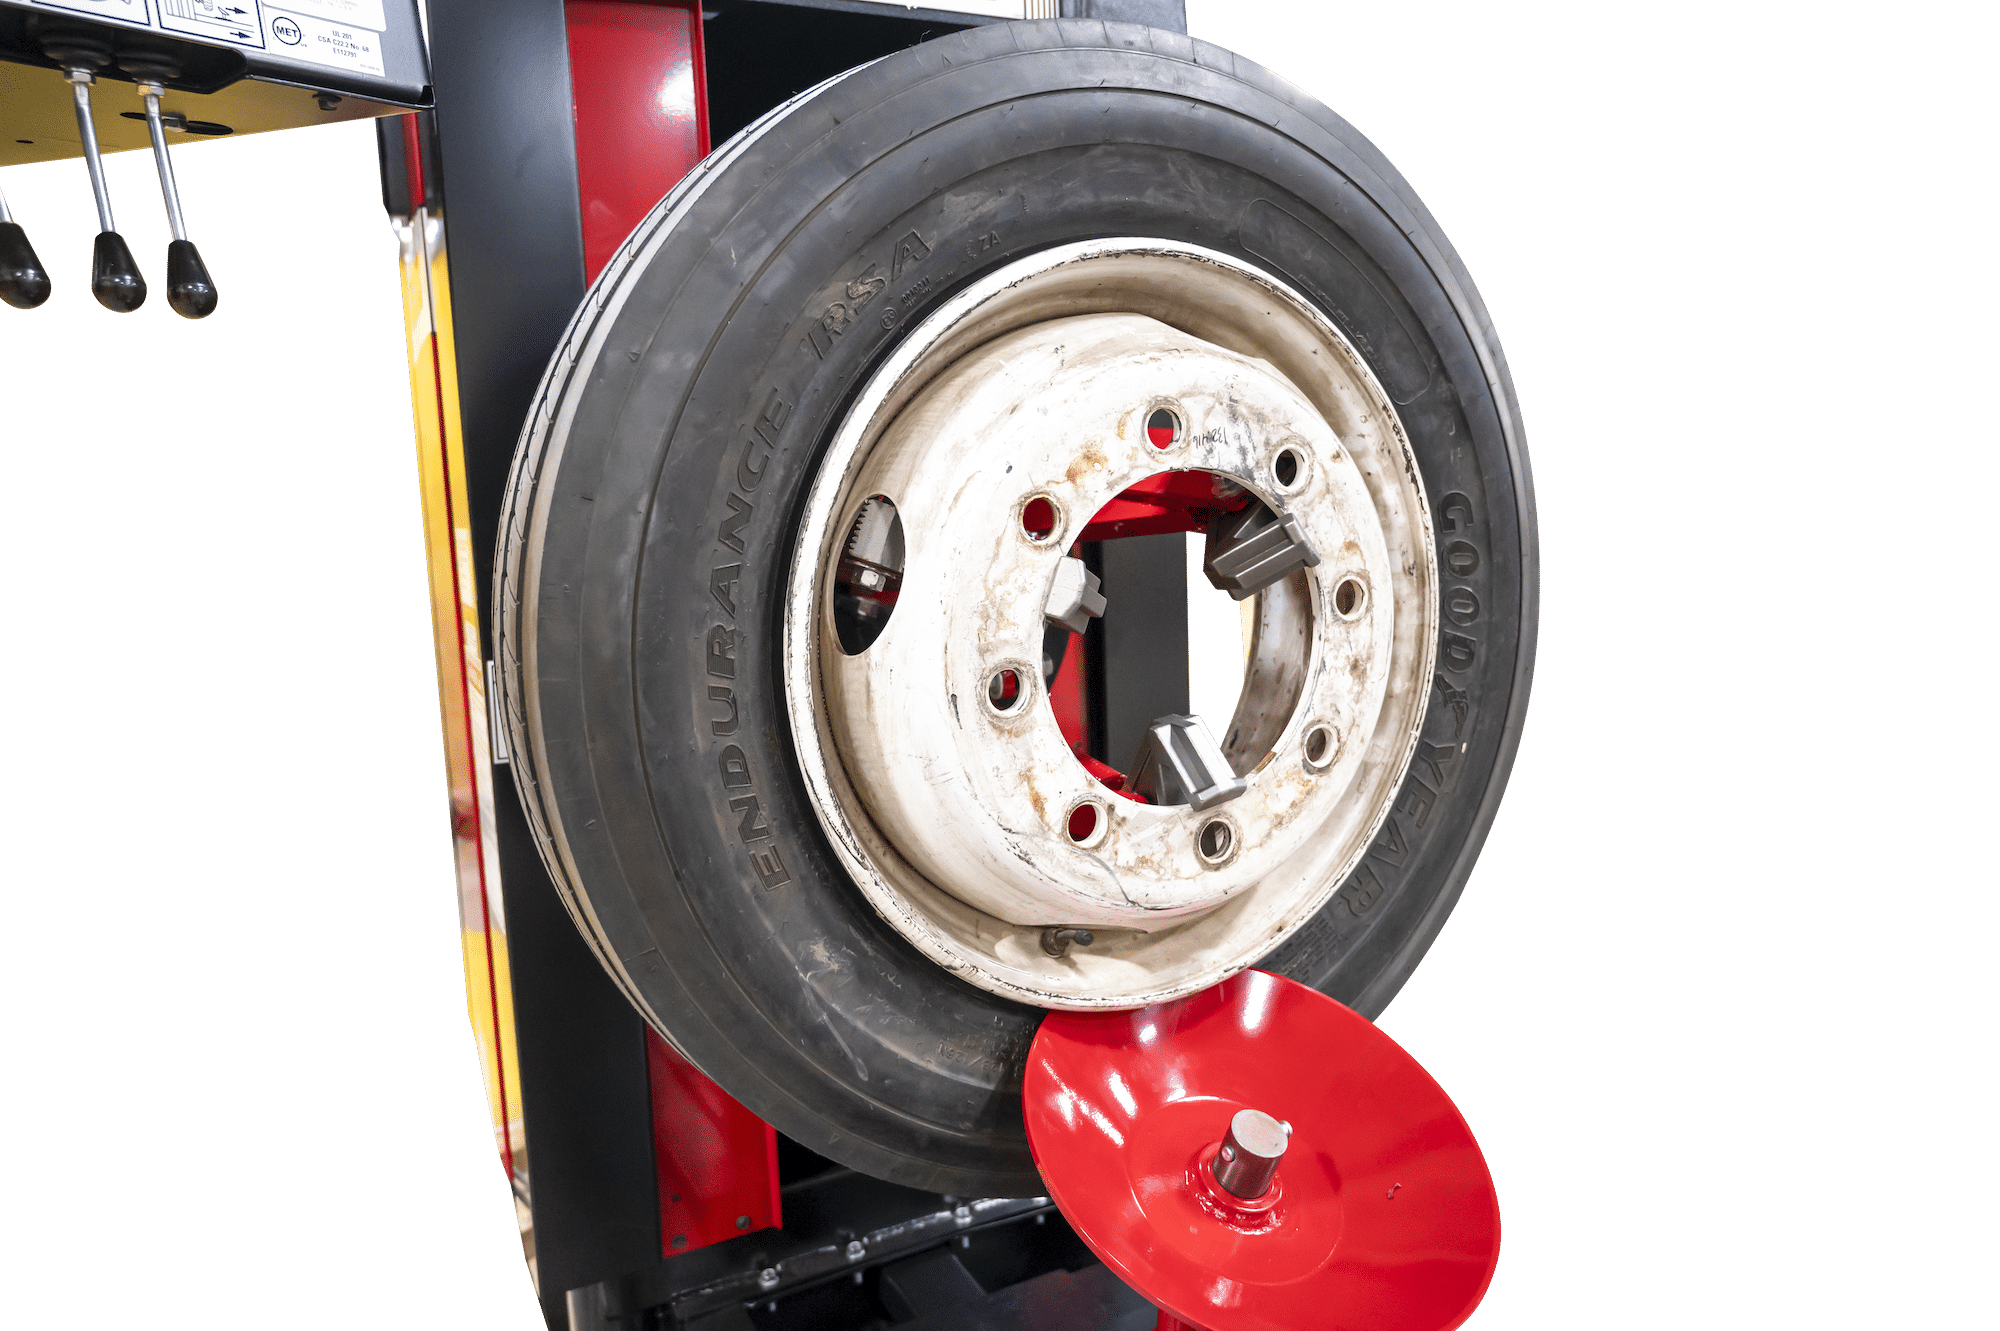 A red disc shaped bead loosener loosens the bead of a tire mounted vertically on a heavy duty tire changer